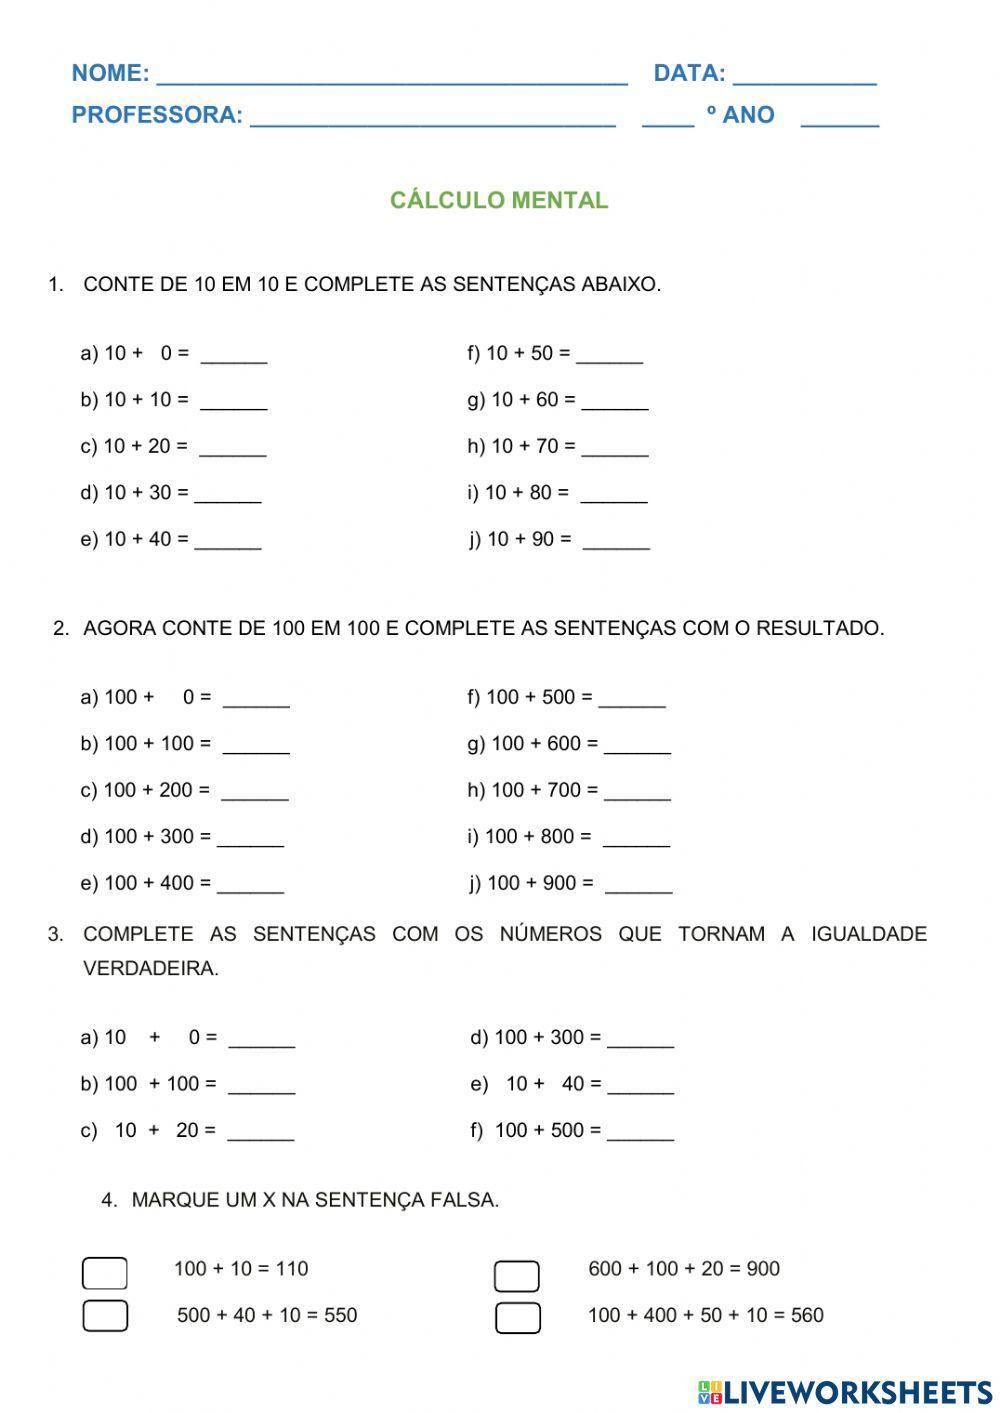 Cálculo Mental online exercise for 3º ano | Live Worksheets